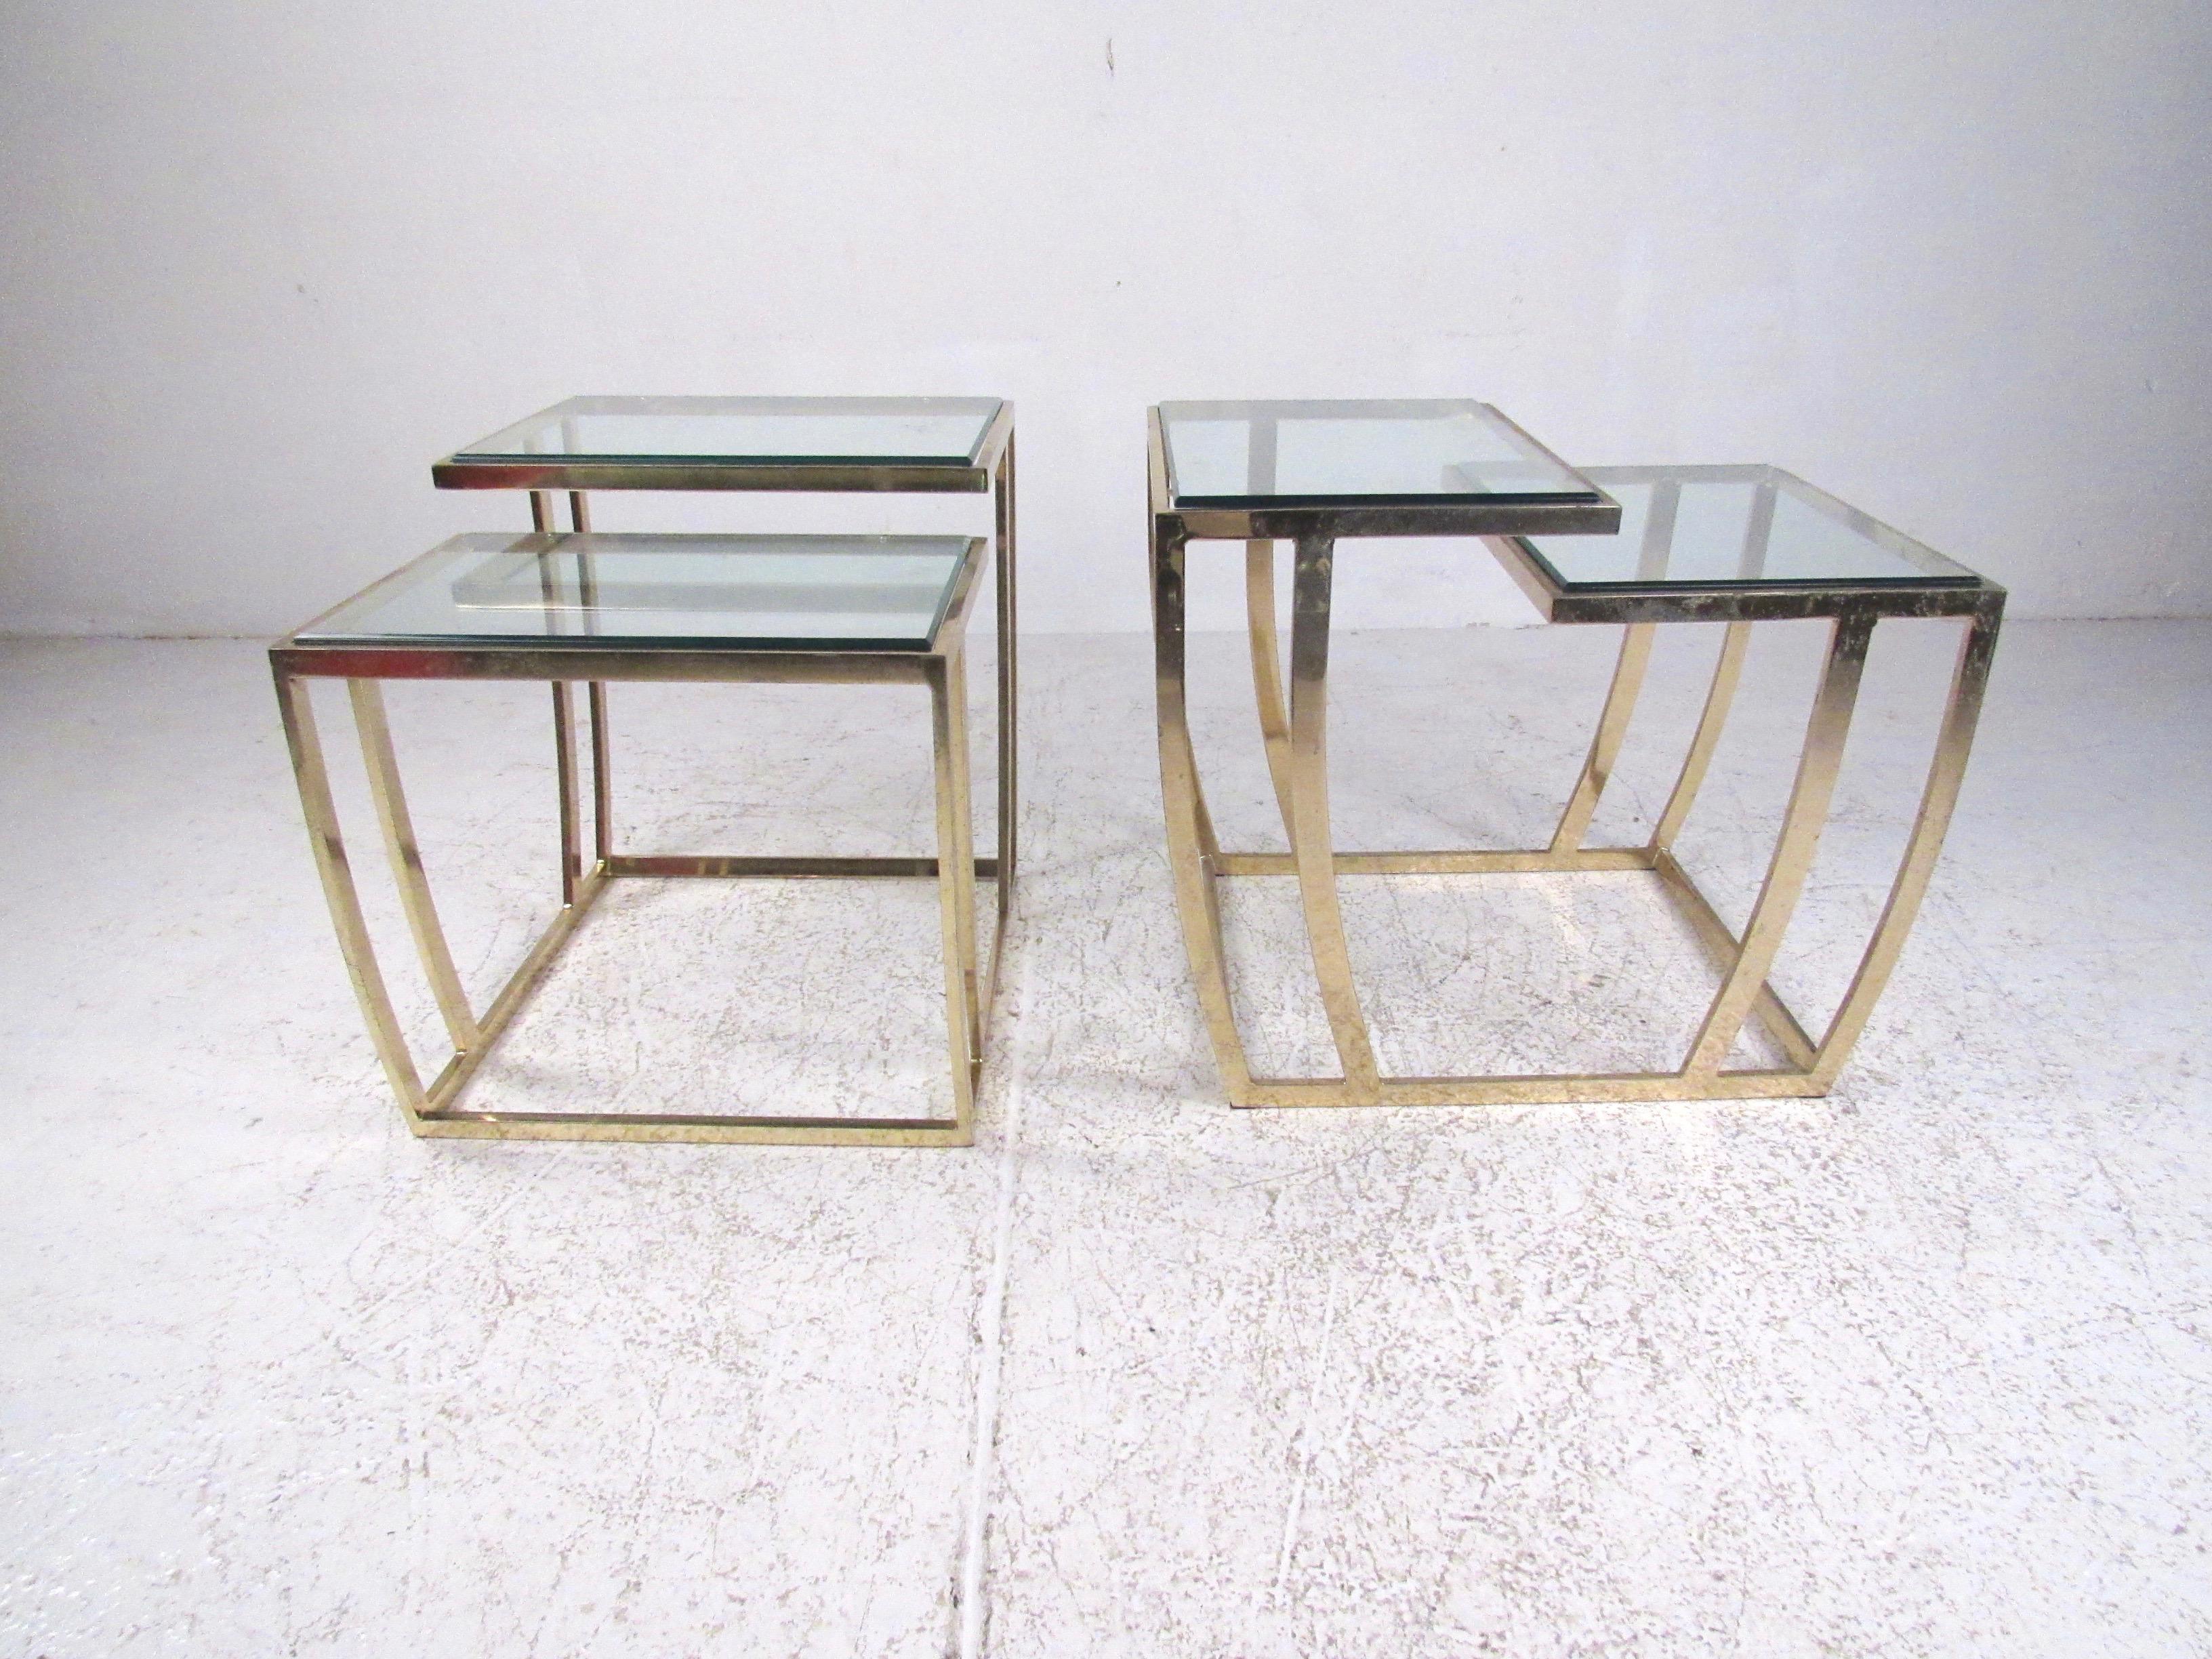 This stylish pair of two-tier end tables adds a unique vintage modern display table to living room or office seating arrangements. Perfect split level table for use as a lamp table or simple side table. The vintage brass plated finish is worn in